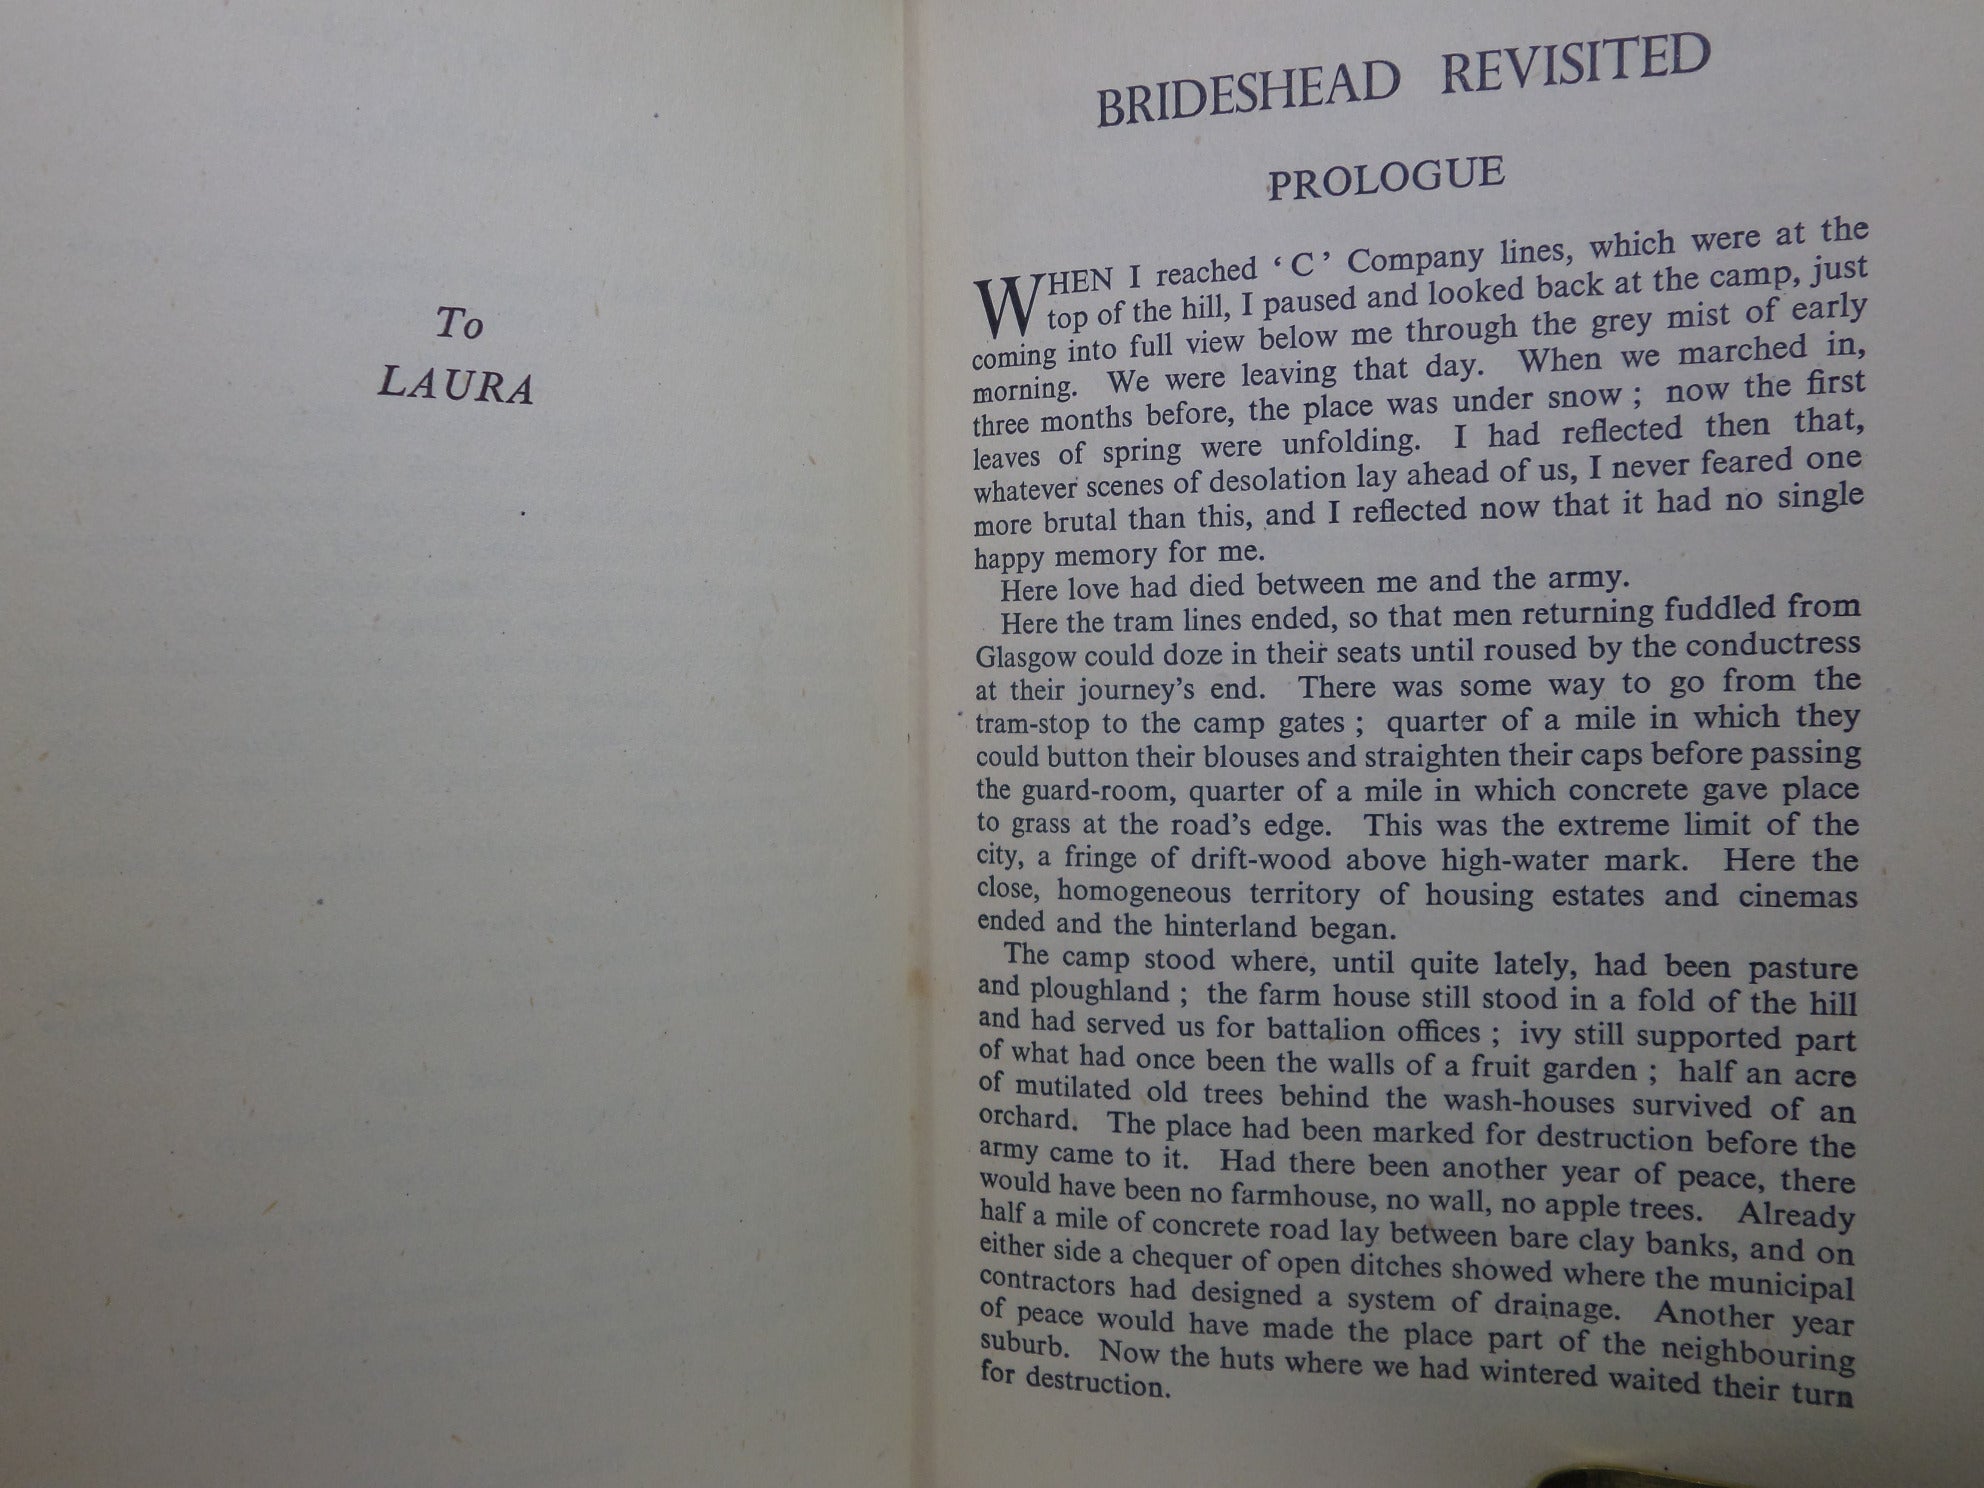 BRIDESHEAD REVISITED BY EVELYN WAUGH 1945 FIRST EDITION